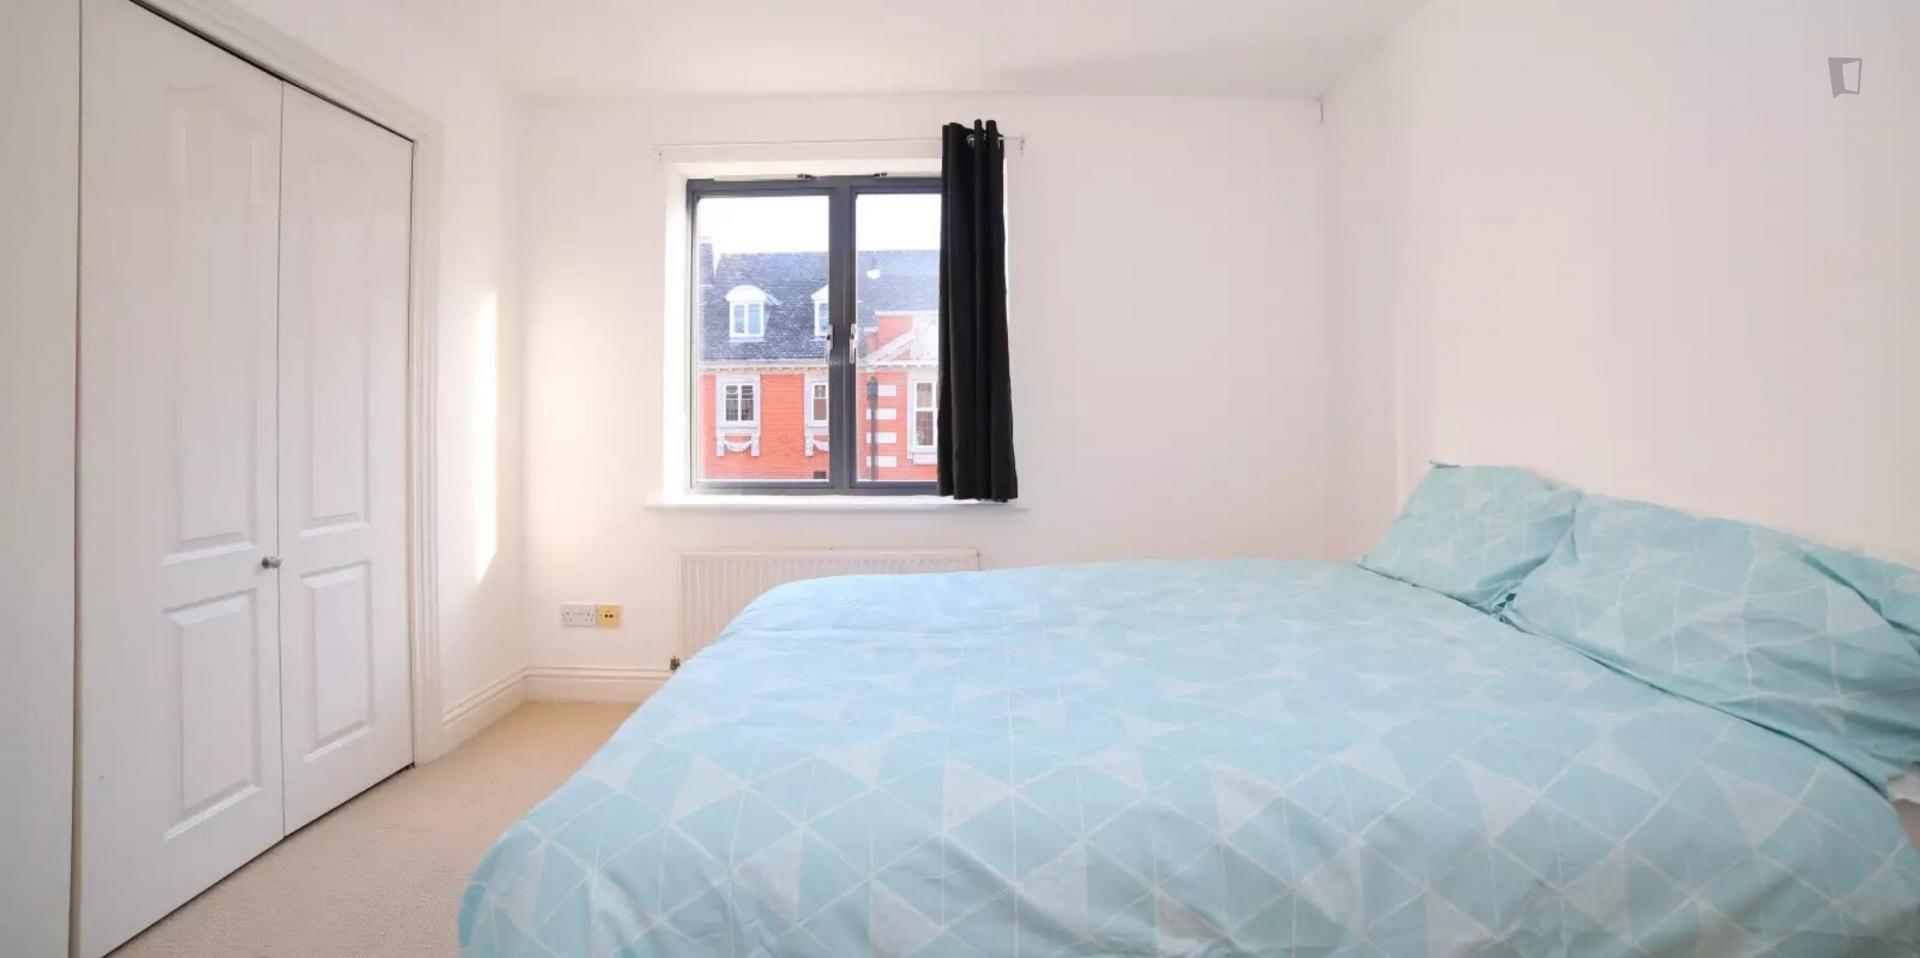 Manor - Shared apartment in London for expats